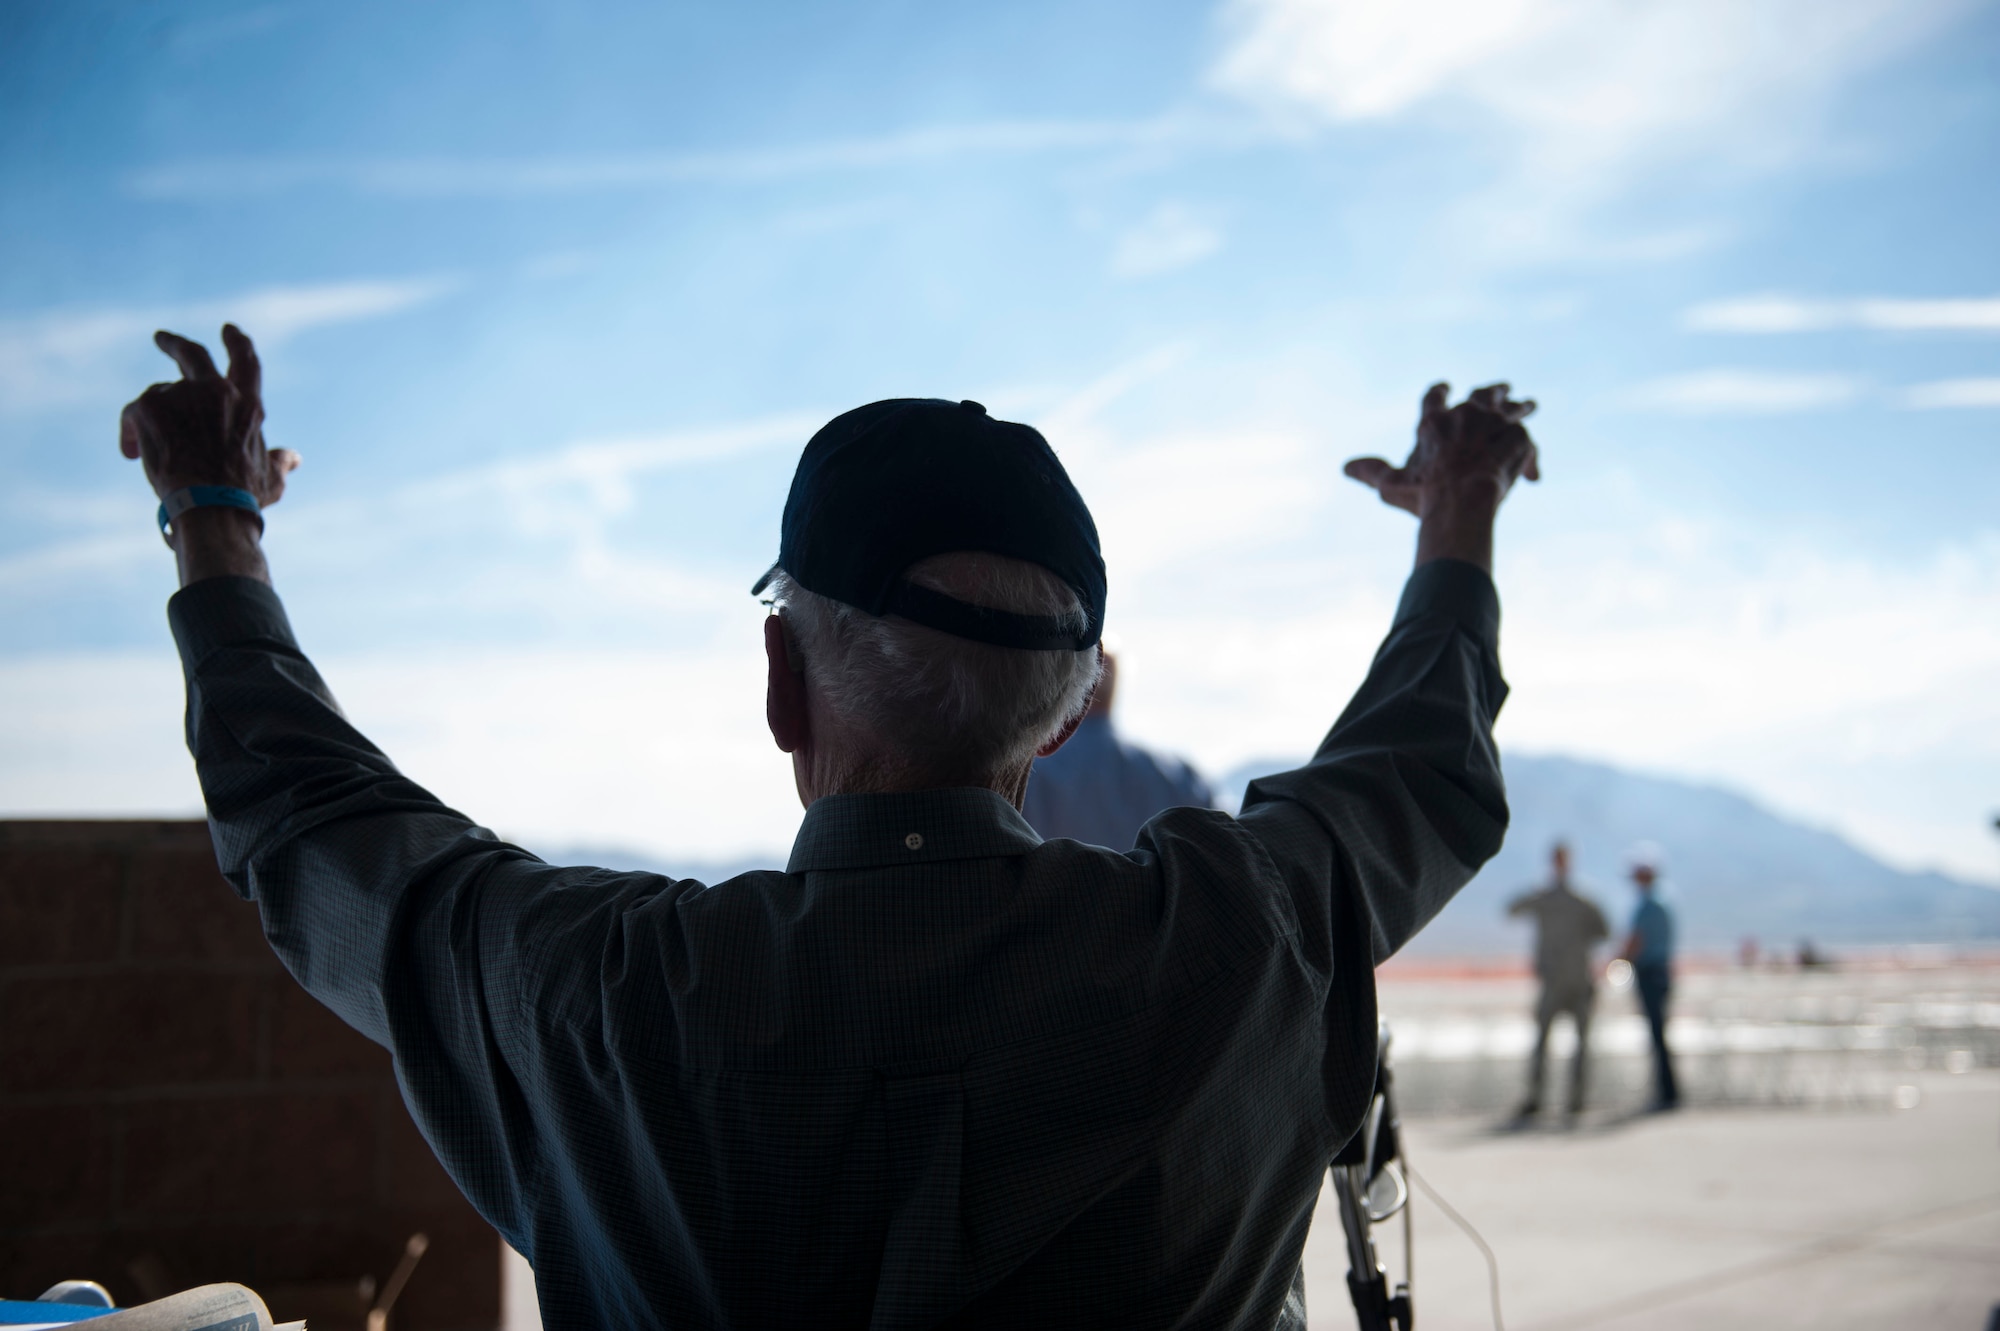 Lenoard Nielson, U.S. Navy Pearl Harbor survivor raises his hands with excitement during the Aviation Nation air show at Nellis Air Force Base, Nev., Nov. 12. This year, Aviation Nation celebrated 75 years of Air Power through the Air Force’s accomplishments  in air, space and cyberspace. During the two-day event, there were more than 50 aircraft on display along with an array of vendors and aerial demonstrations for viewers. (U.S. Air Force photo by Senior Airman Rachel Loftis/released)